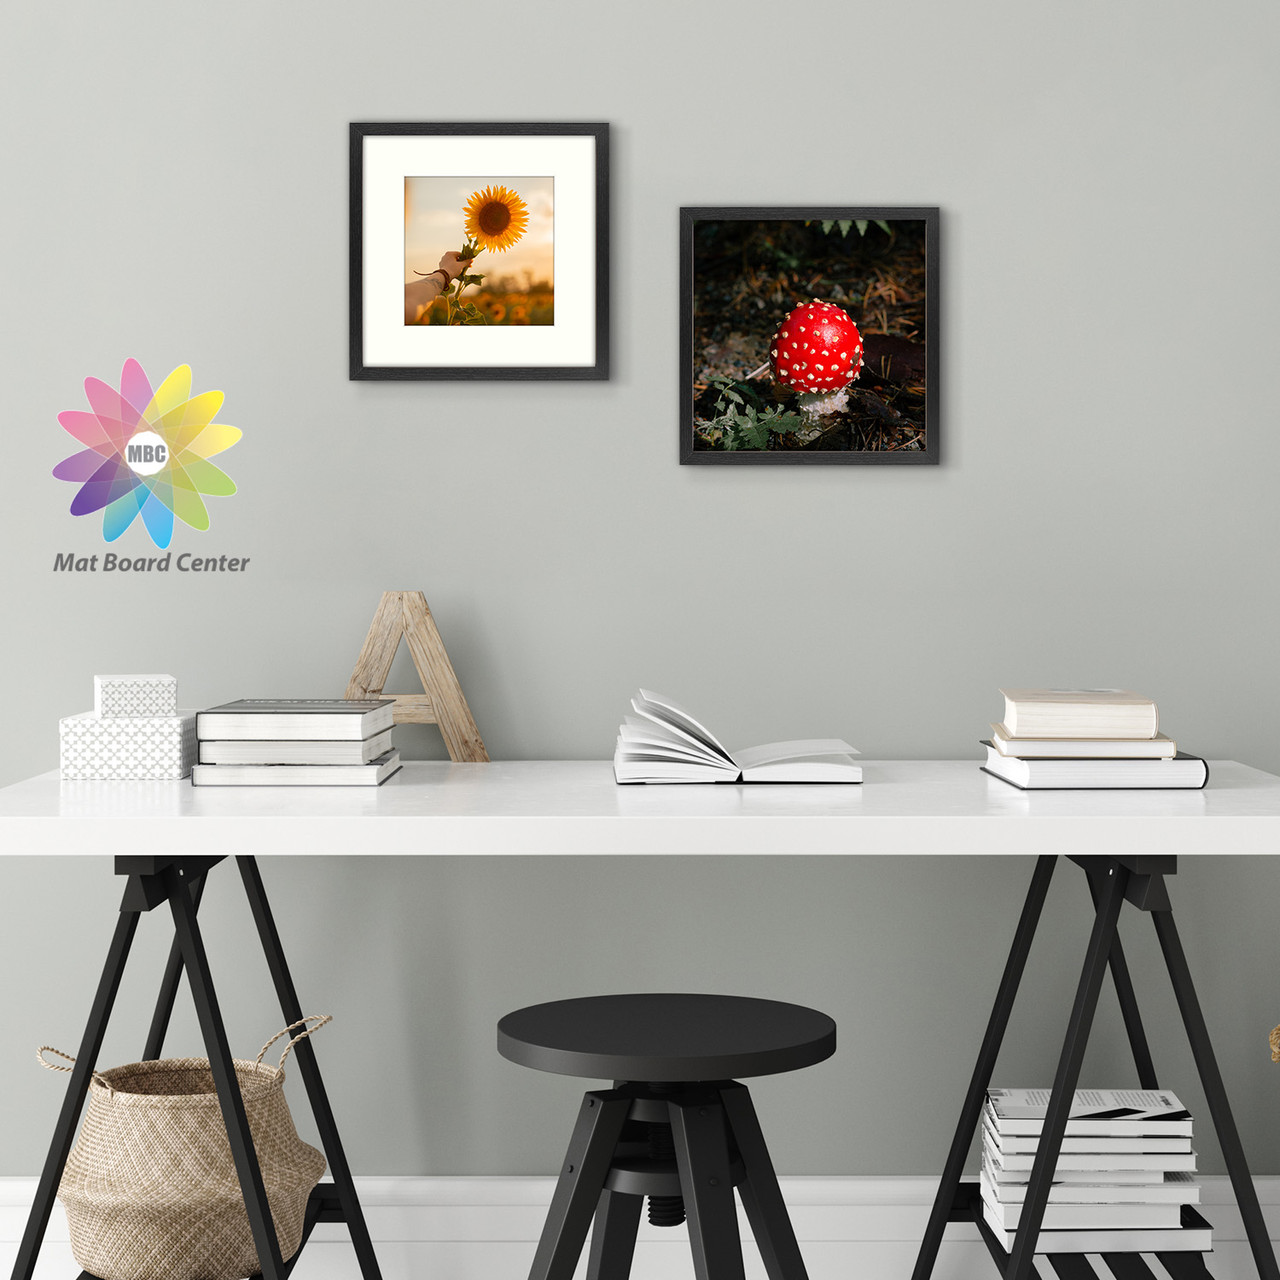 Gallery Solutions 12x12 Black Wall Frame with Double White Mat For 8x8  Picture 